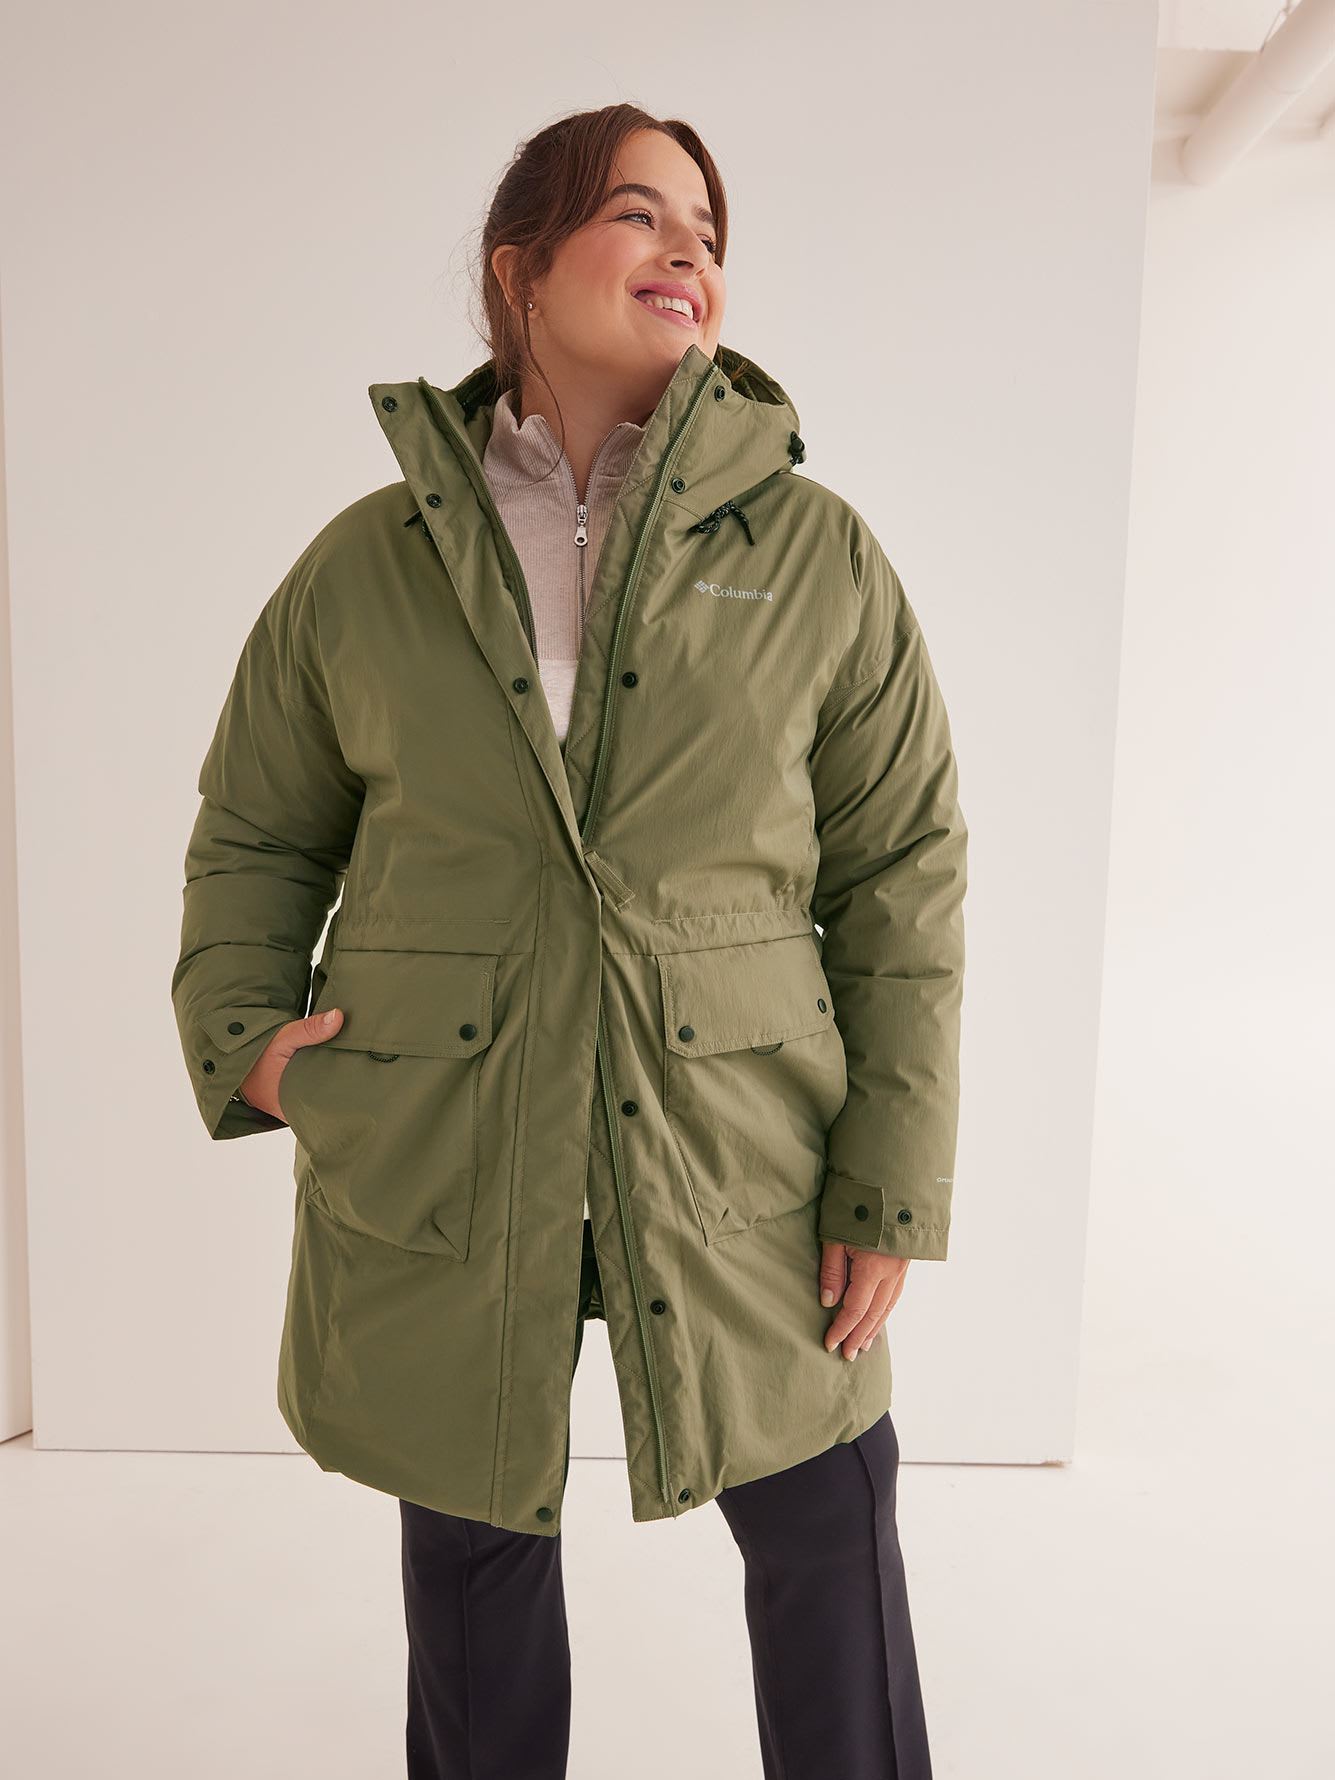 Rosewood Lined Parka - Columbia